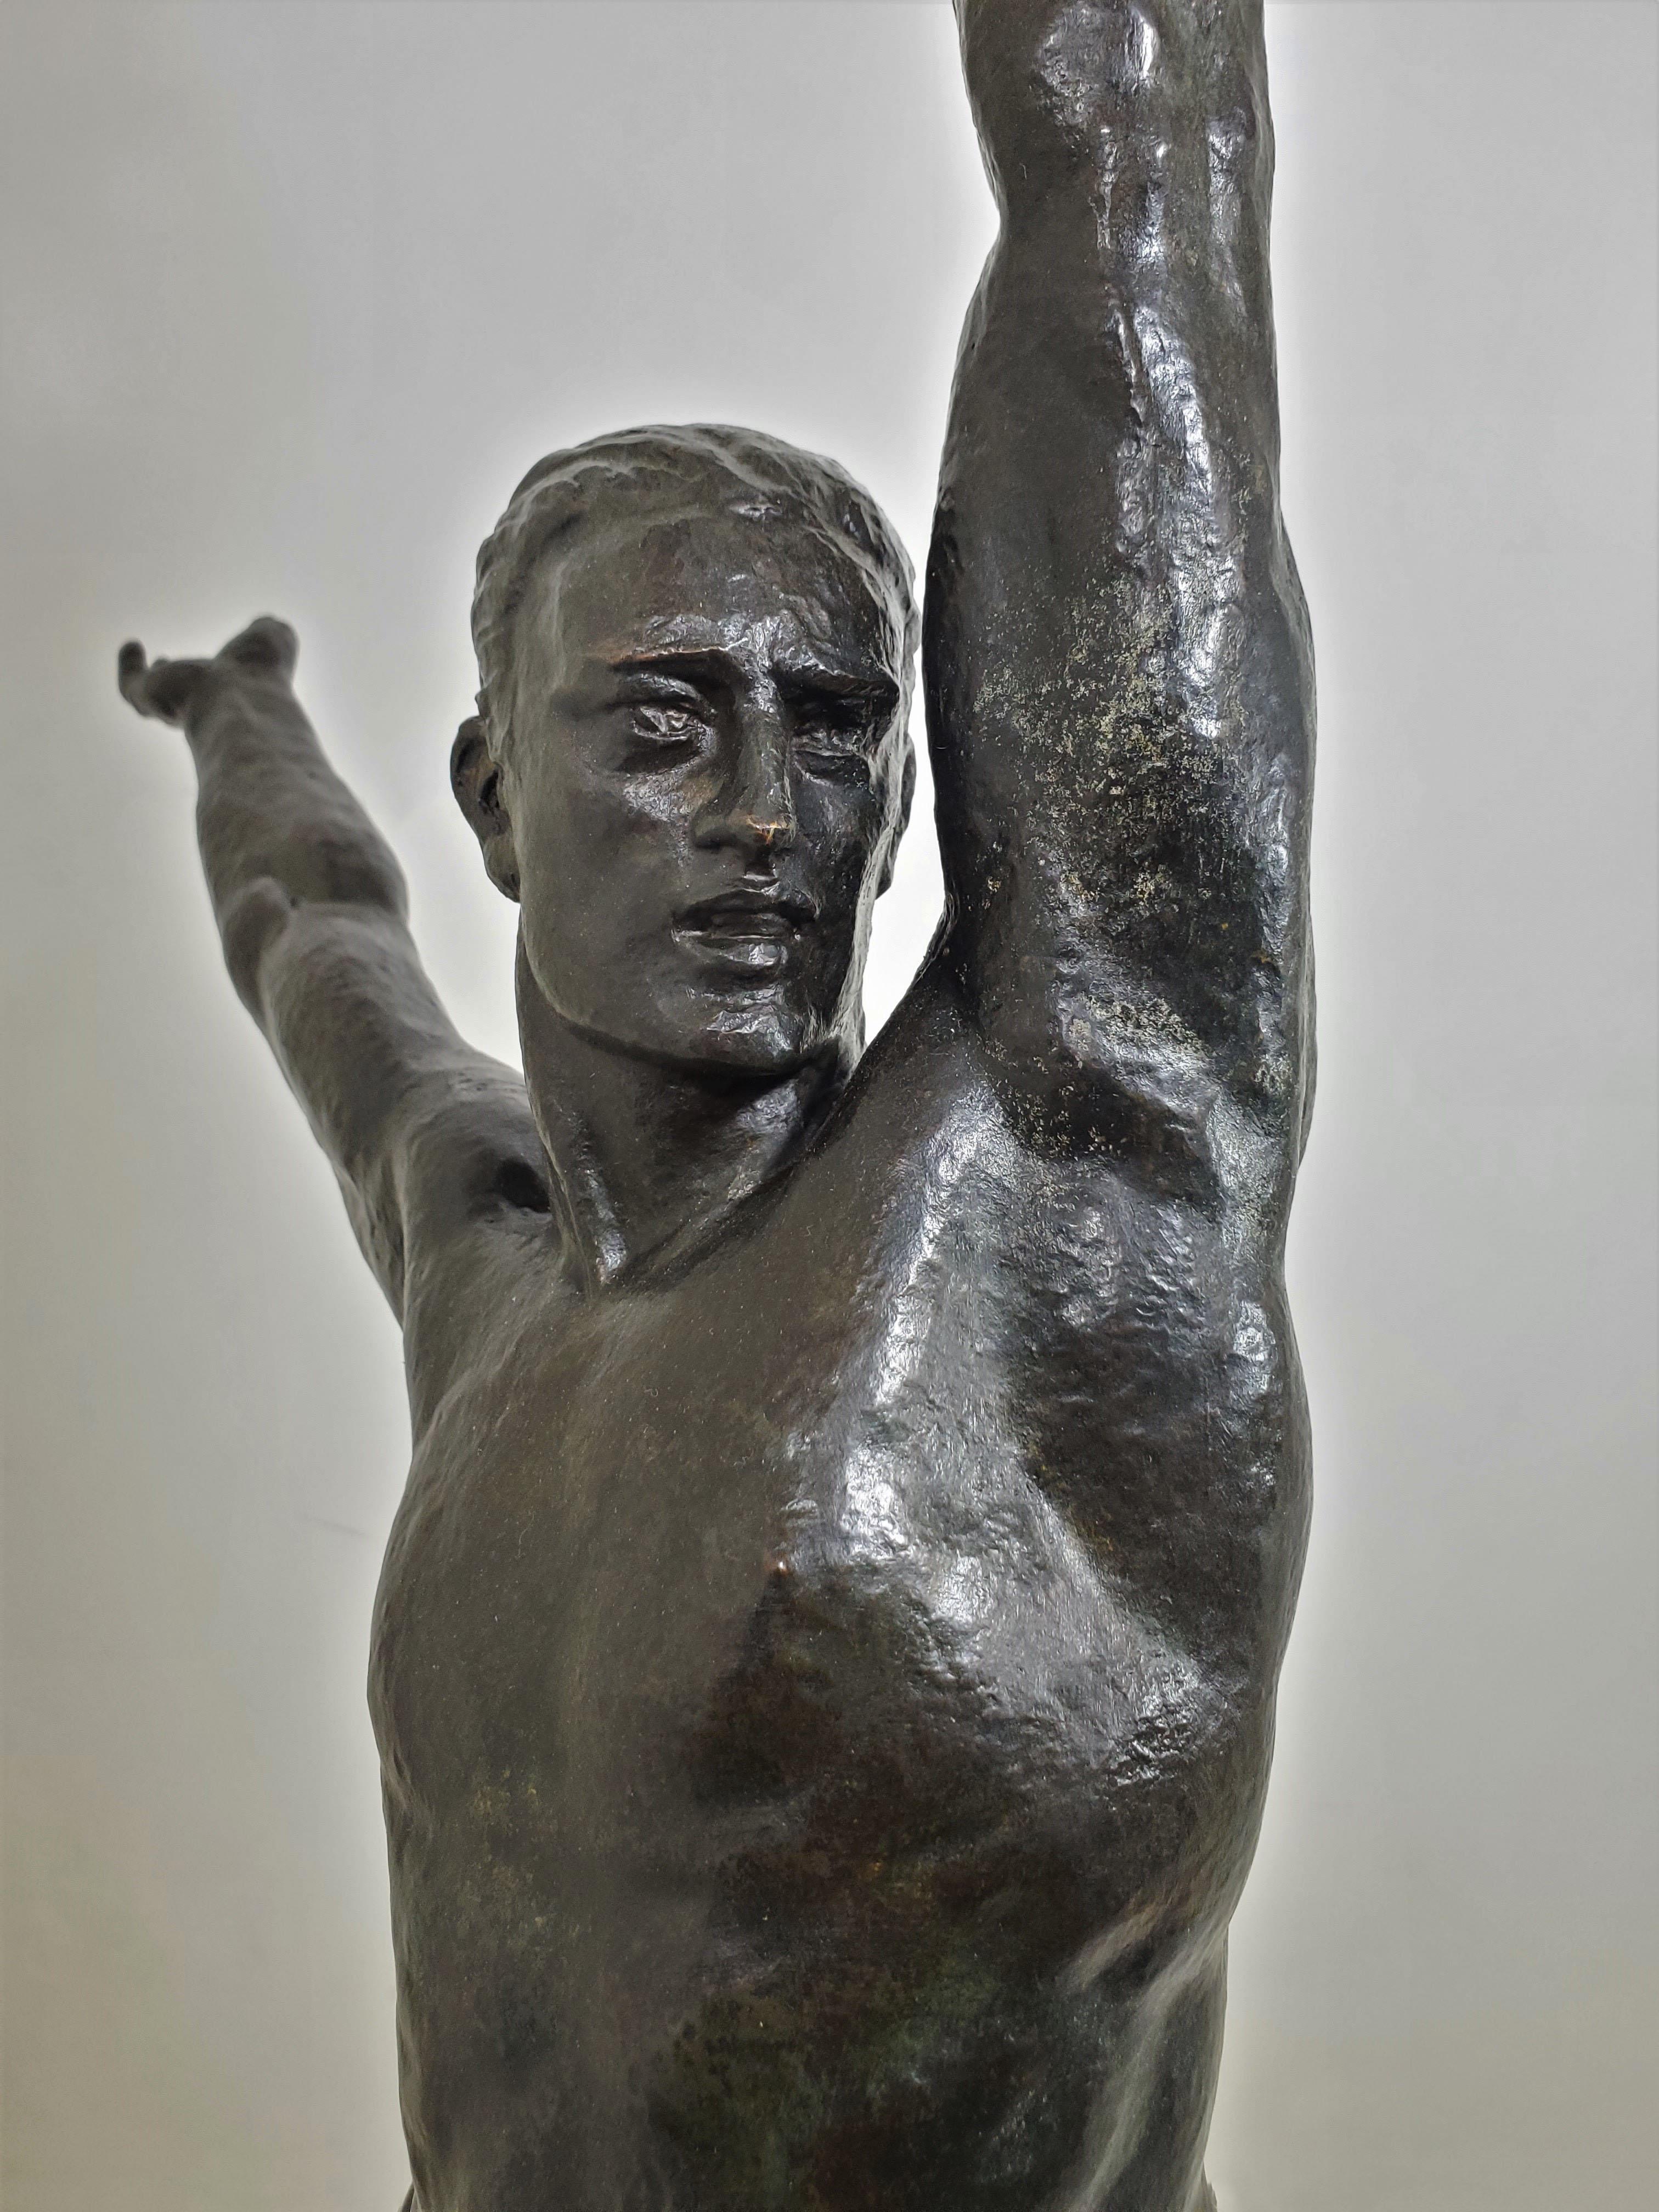 Large Original French Art Deco Bronze of a Semi-Nude Male Athlete by Le Faguays For Sale 2